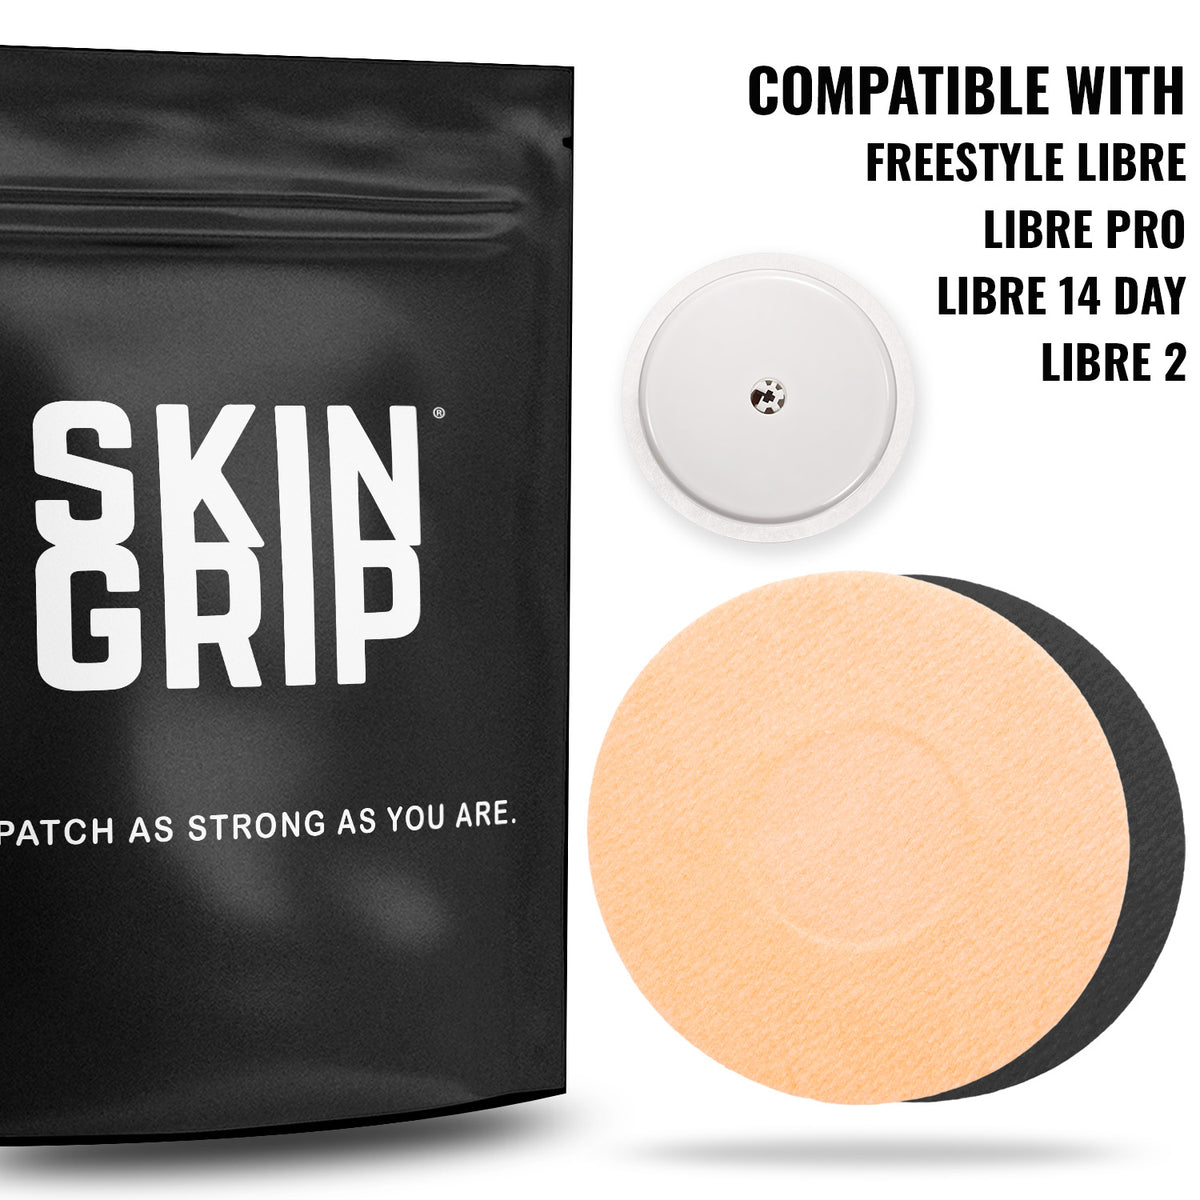 Skin Grip MAX Freestyle Libre 2 Patches - 10 Pack